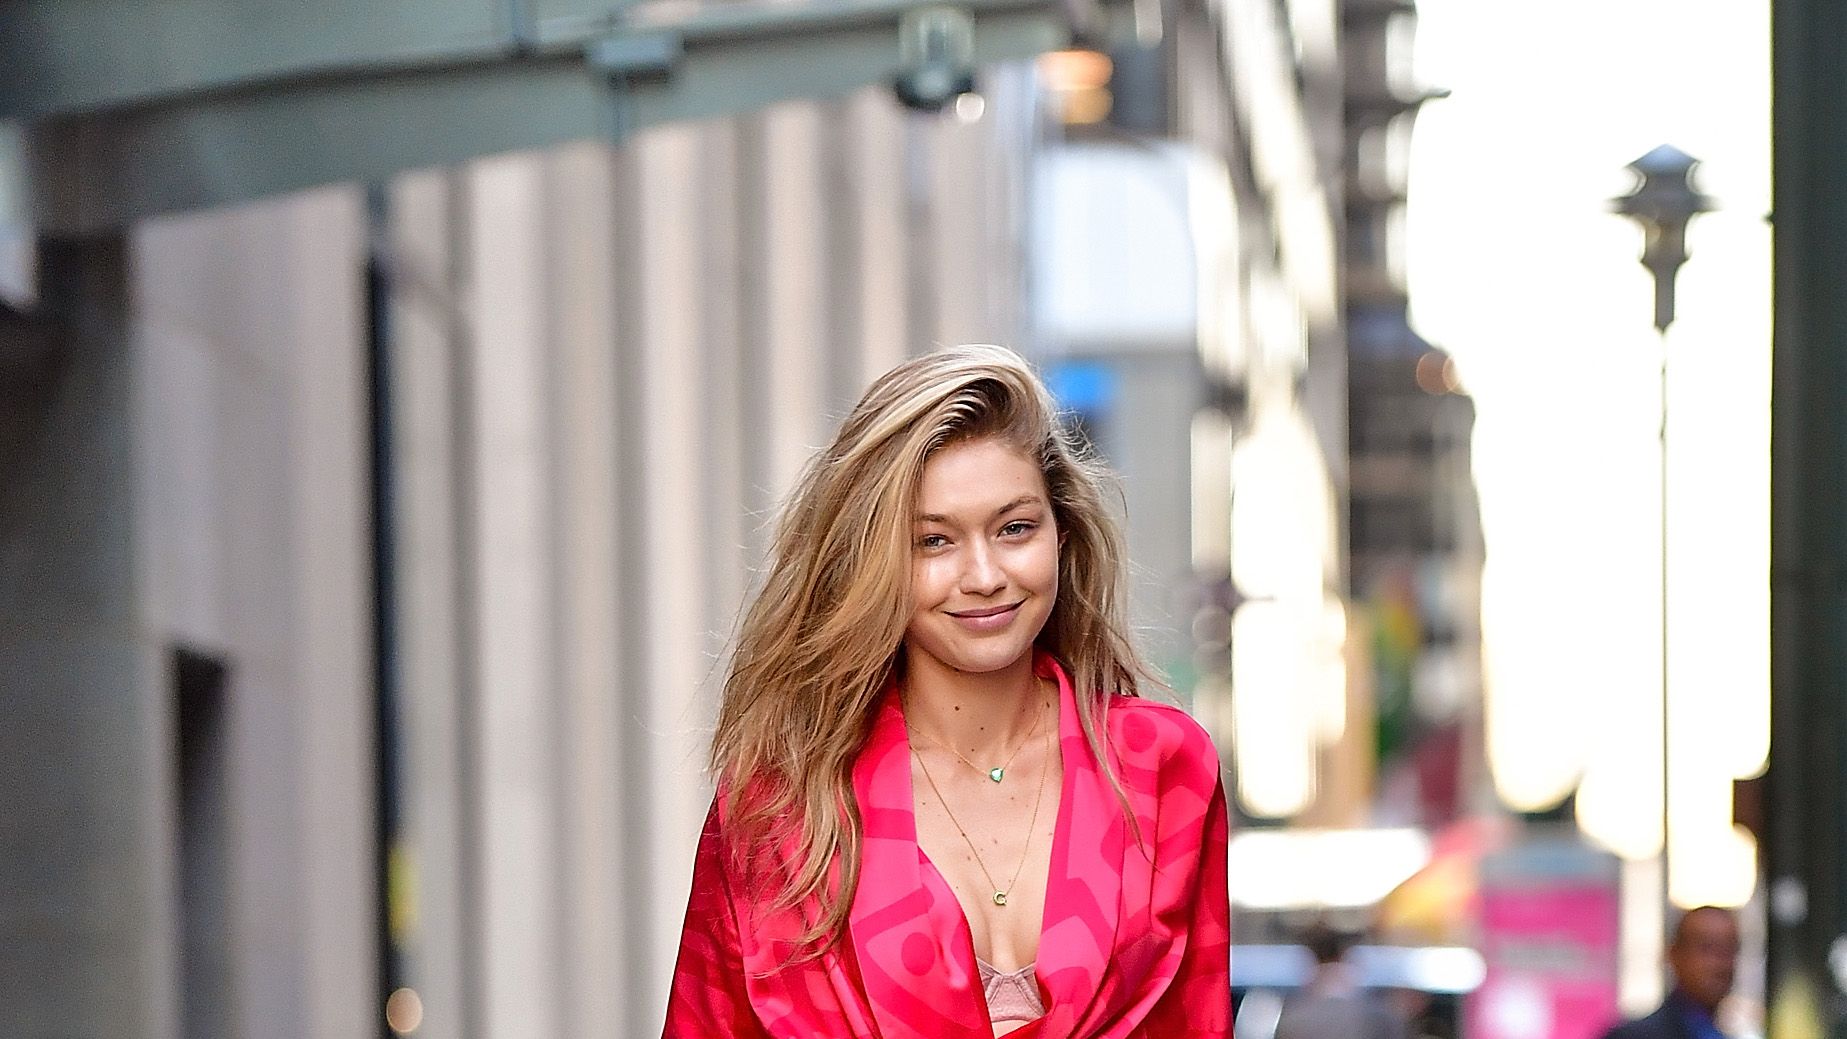 Gigi giving us some serious outfit inspo